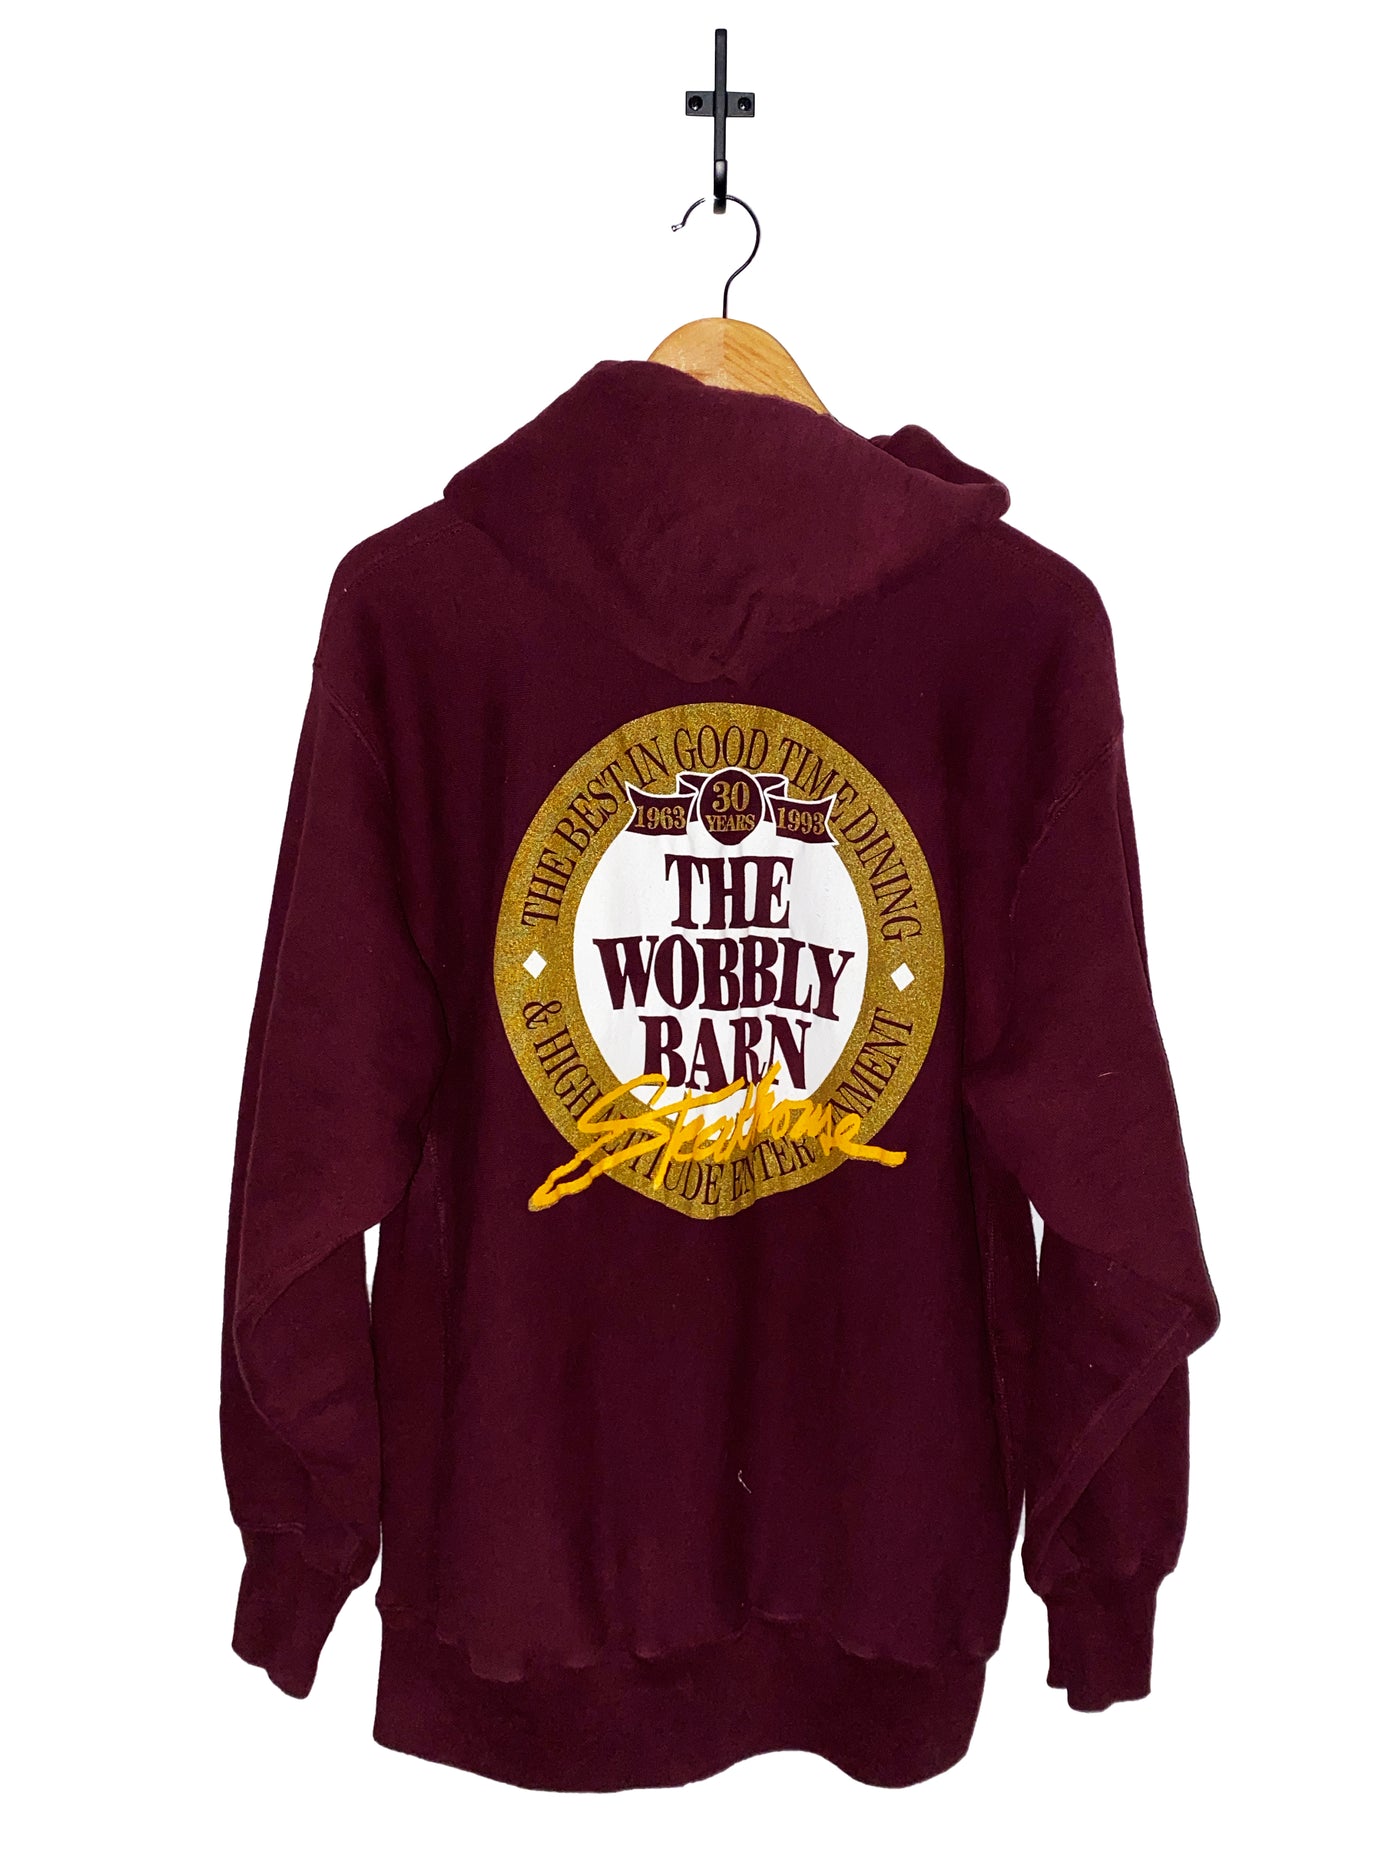 Vintage 1993 ‘The Wobbly Barn’ Steakhouse Hoodie